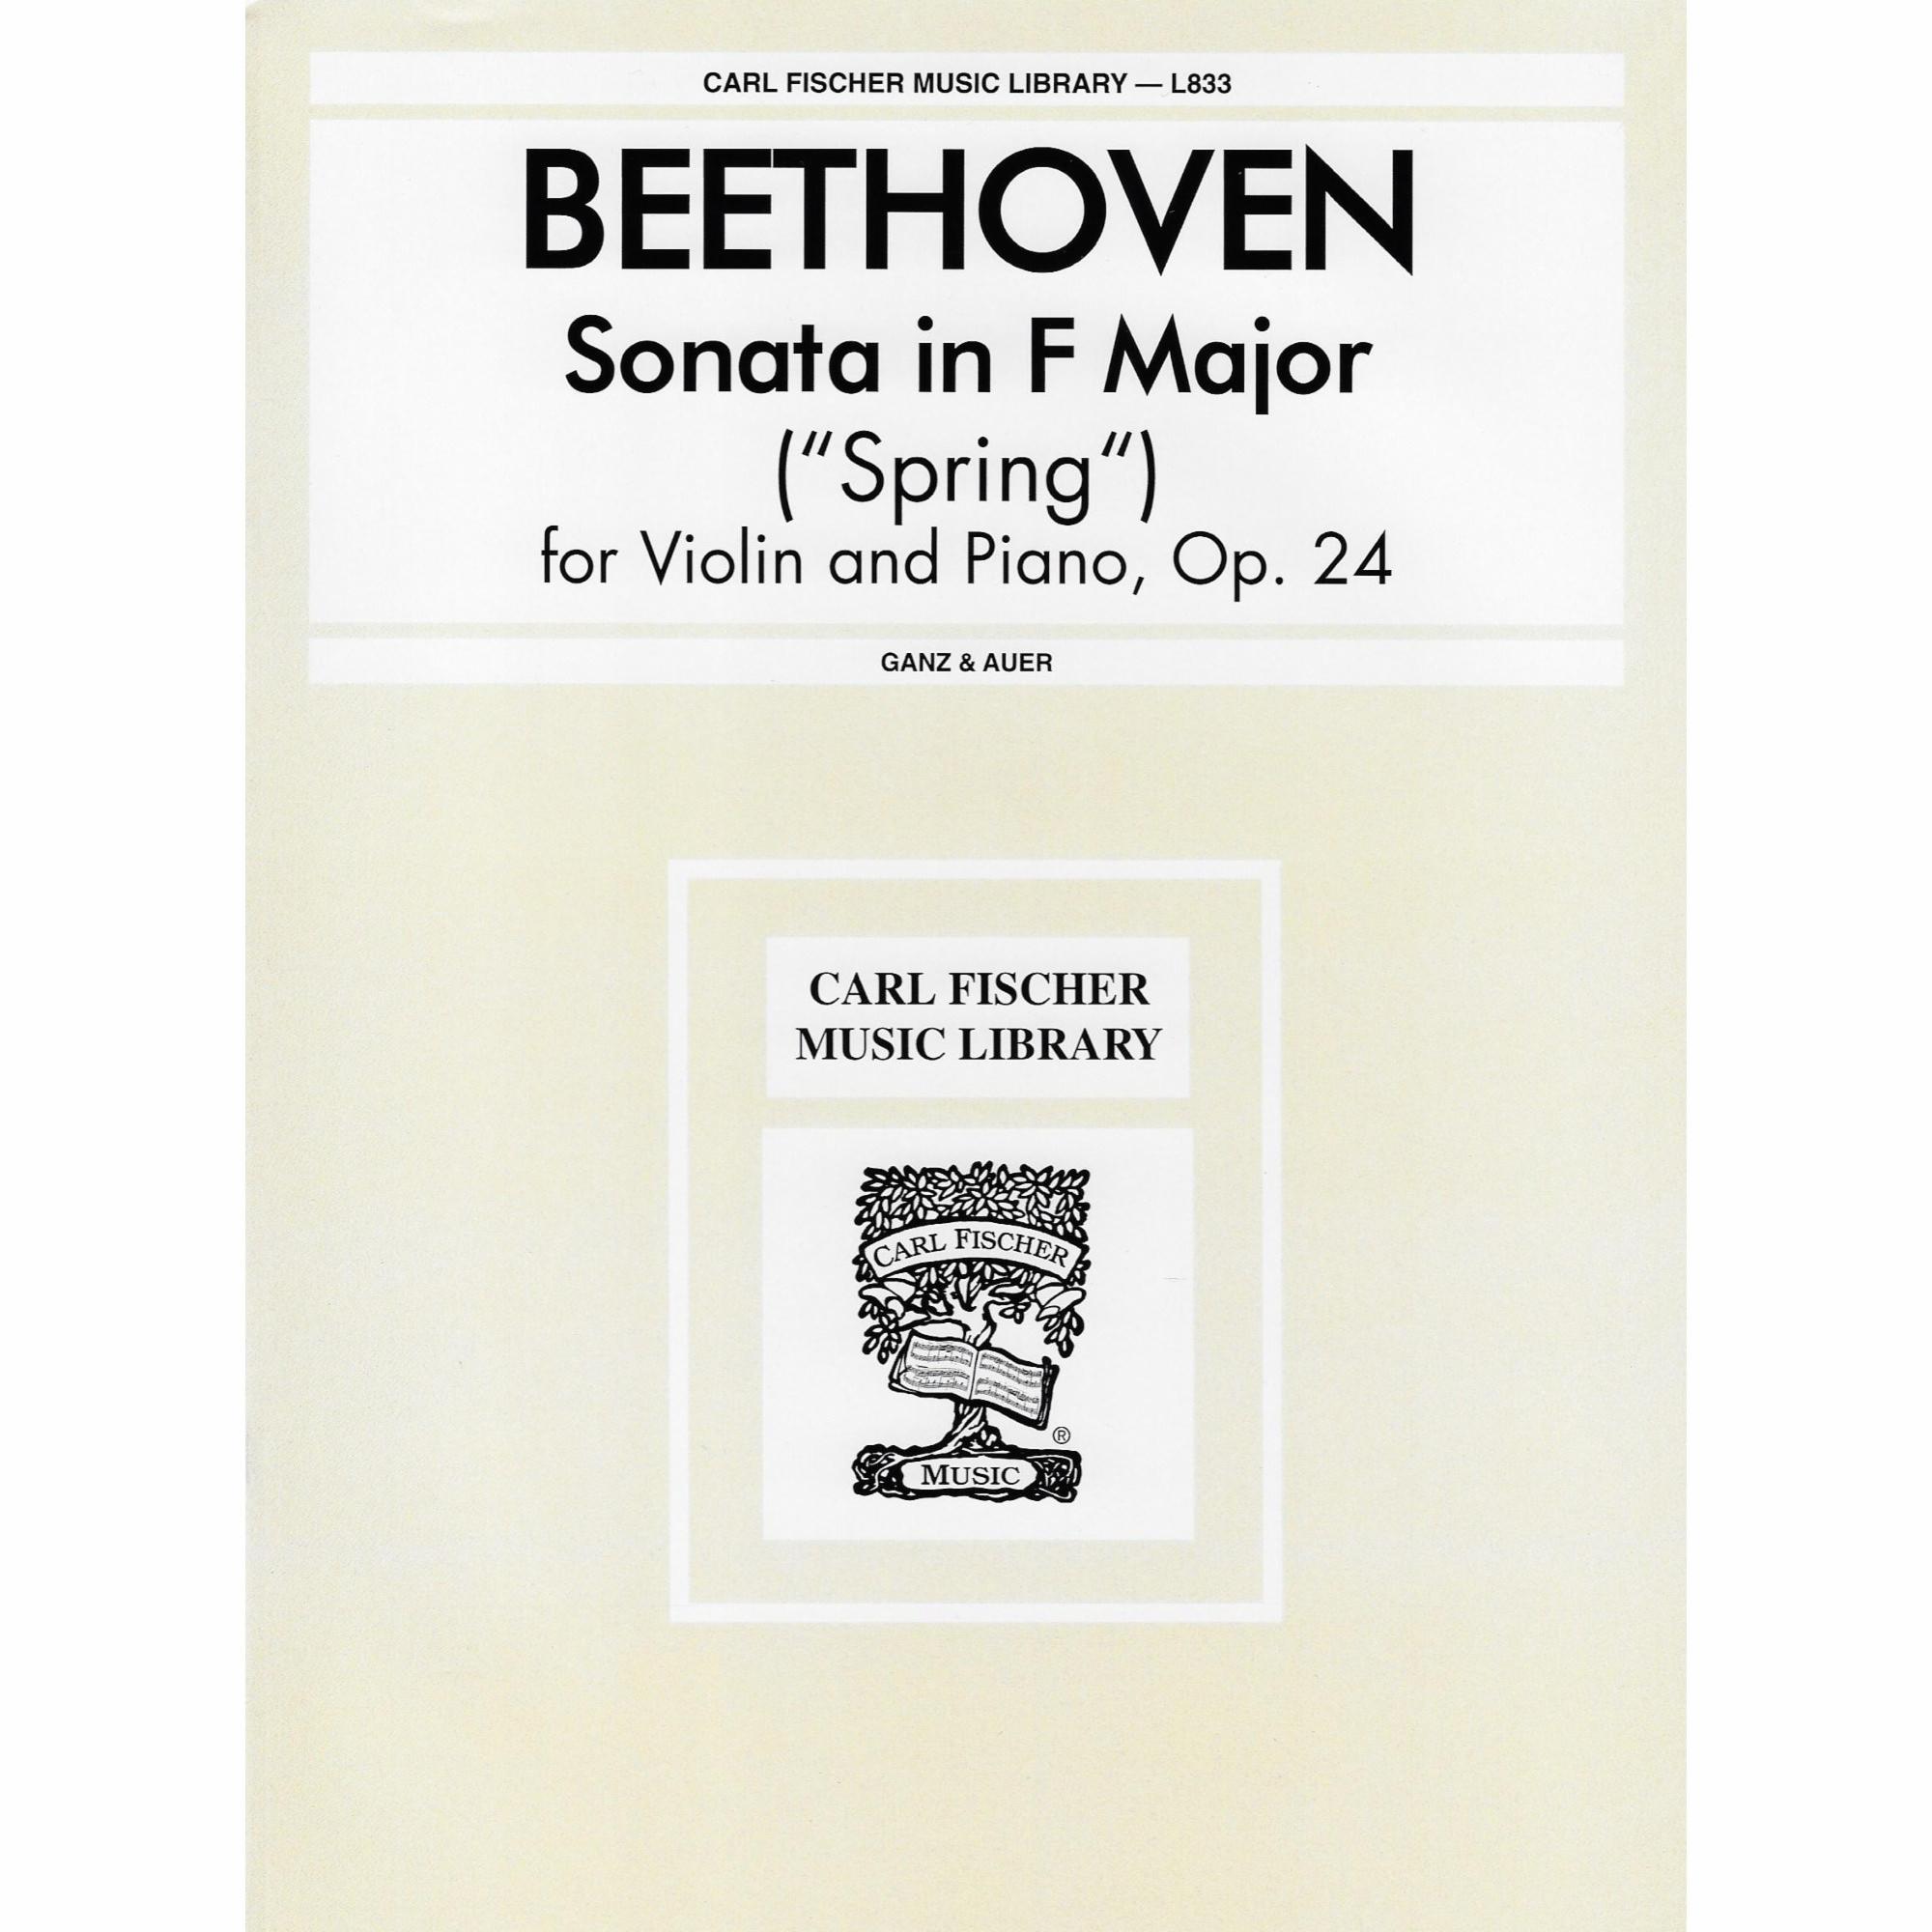 Beethoven -- Sonata in F Major, Op. 24 (Spring) for Violin and Piano